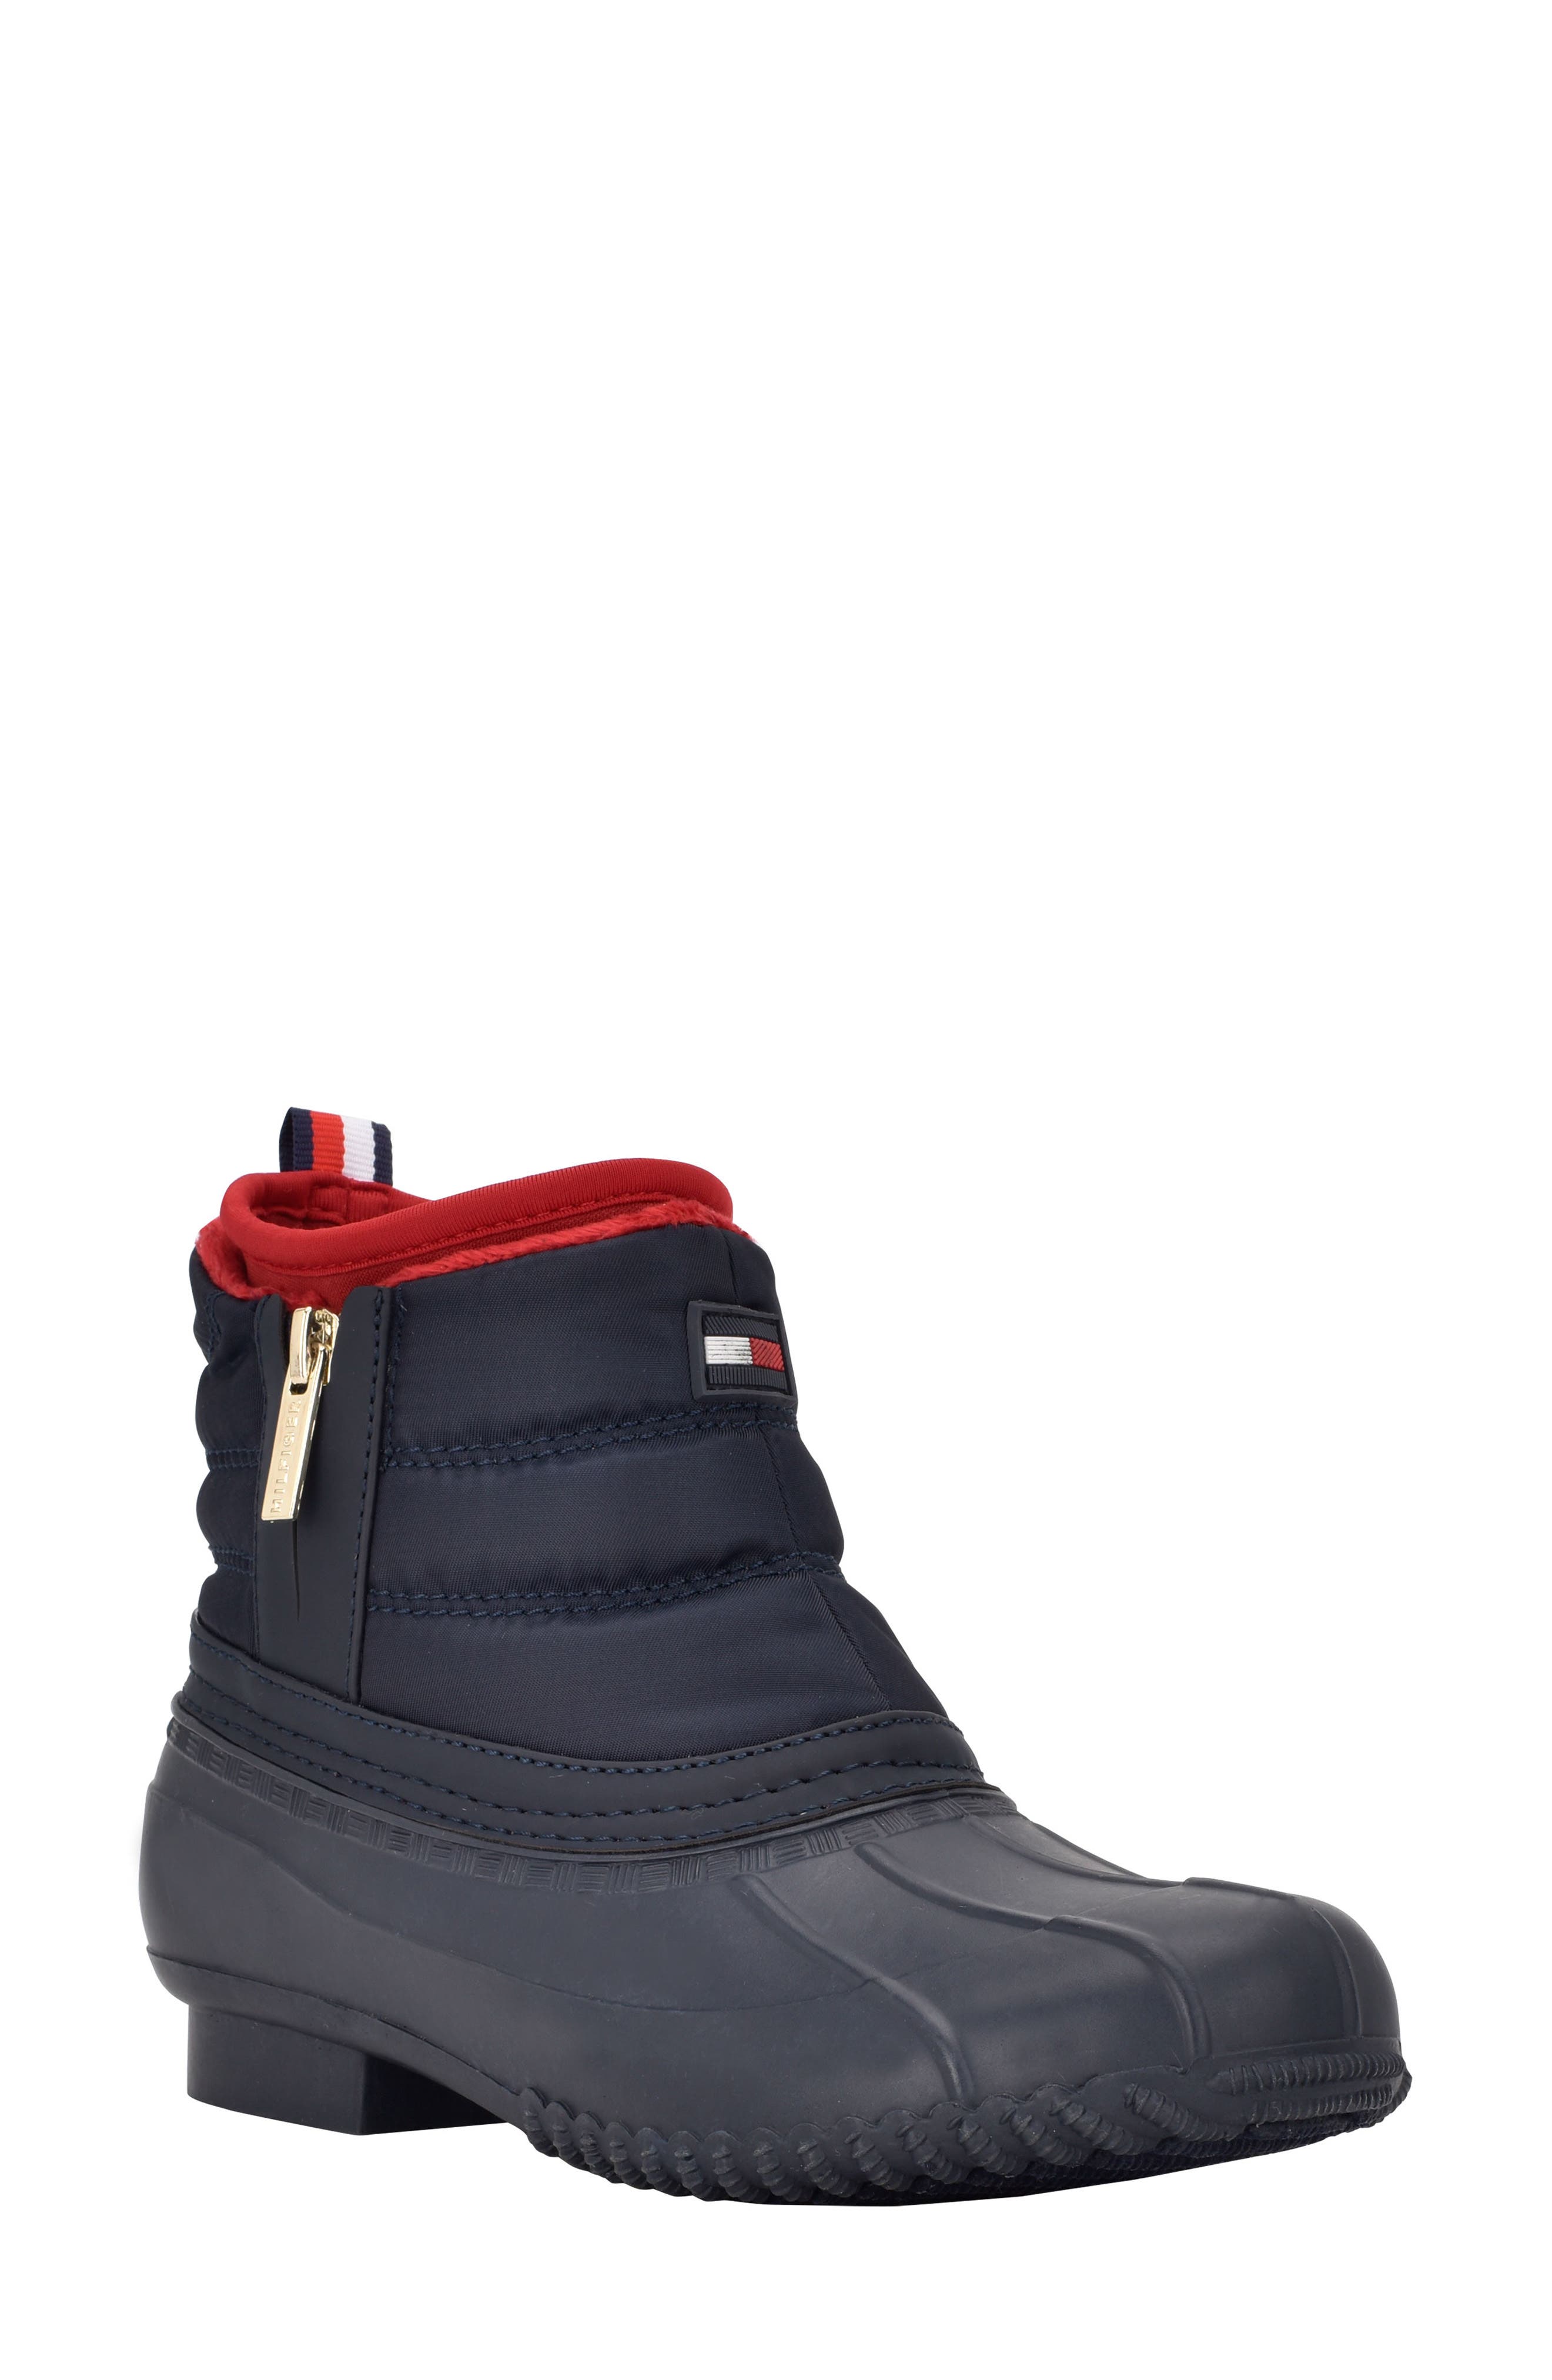 UPC 195972717978 product image for Tommy Hilfiger Waterproof Roana Duck Boot, Size 10 in Dark Blue at Nordstrom | upcitemdb.com